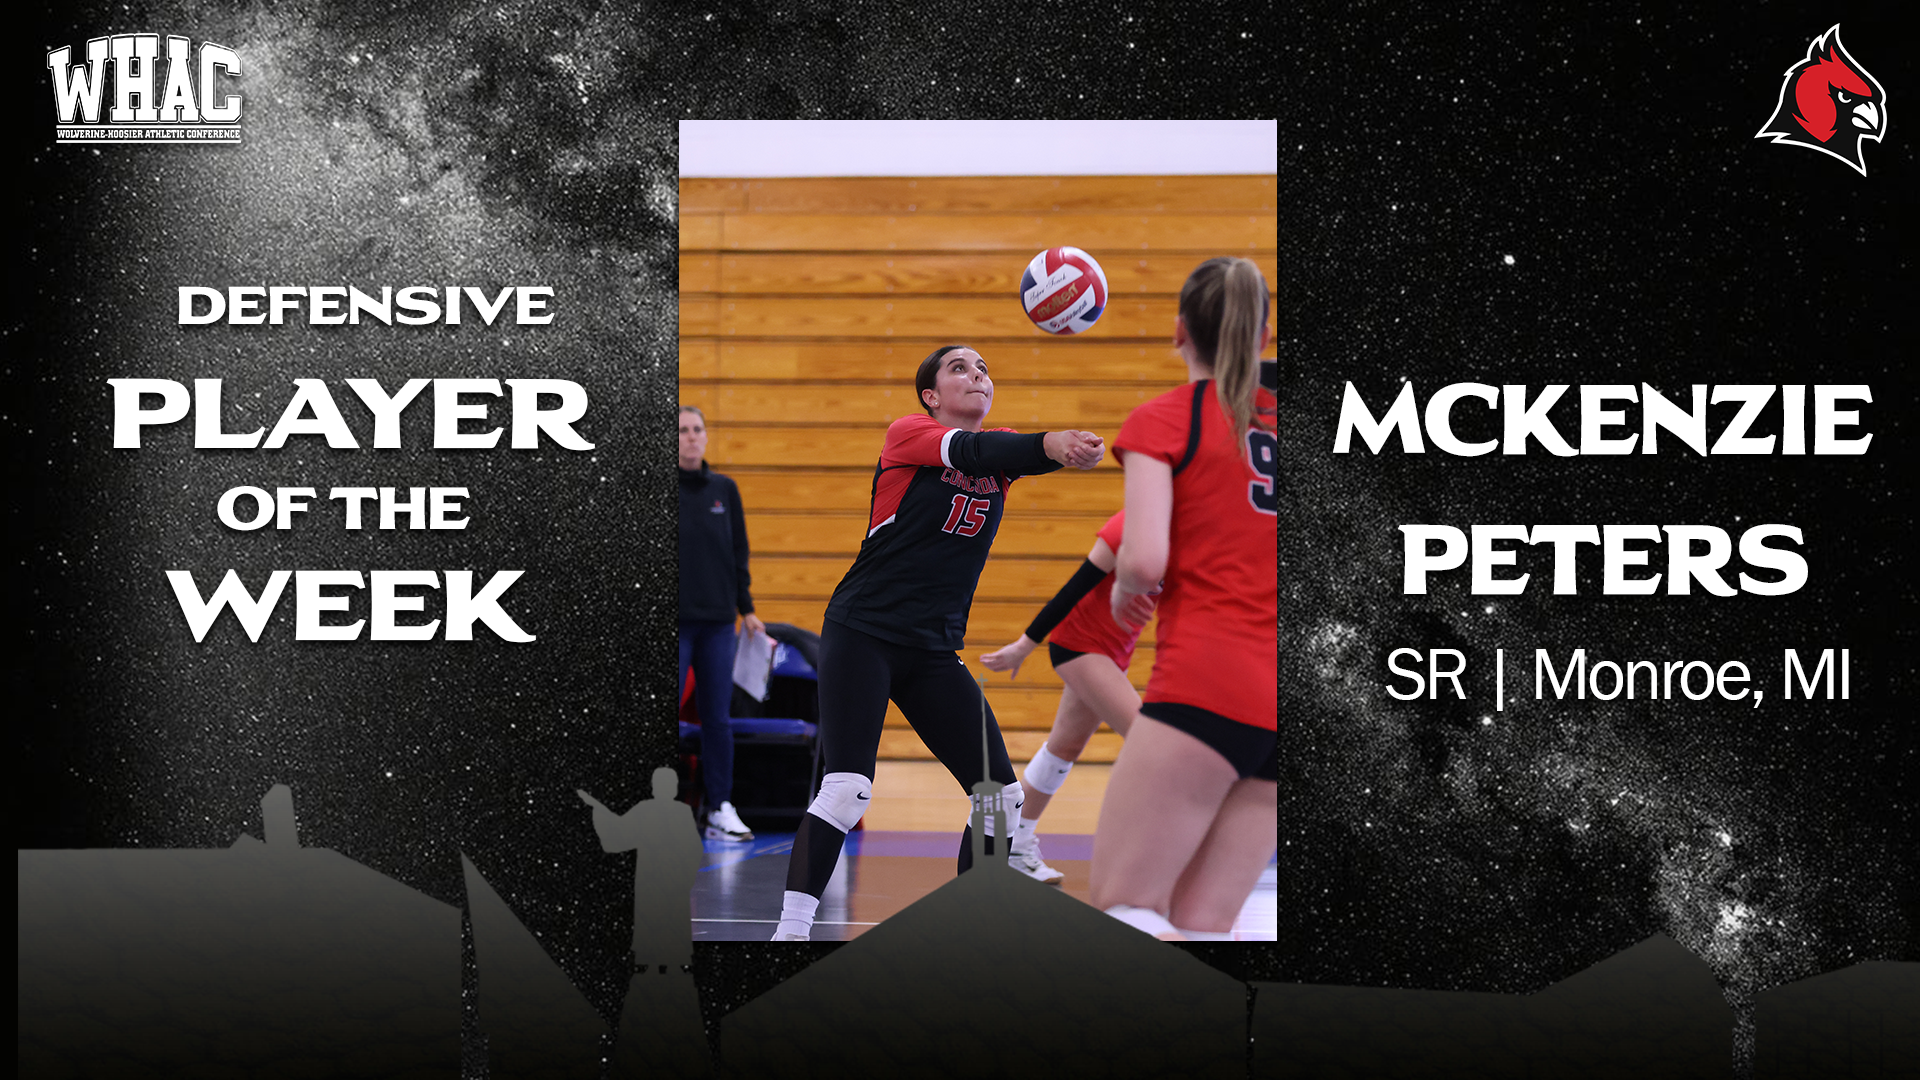 McKenzie Peters takes home third WHAC Player of the Week honor this season